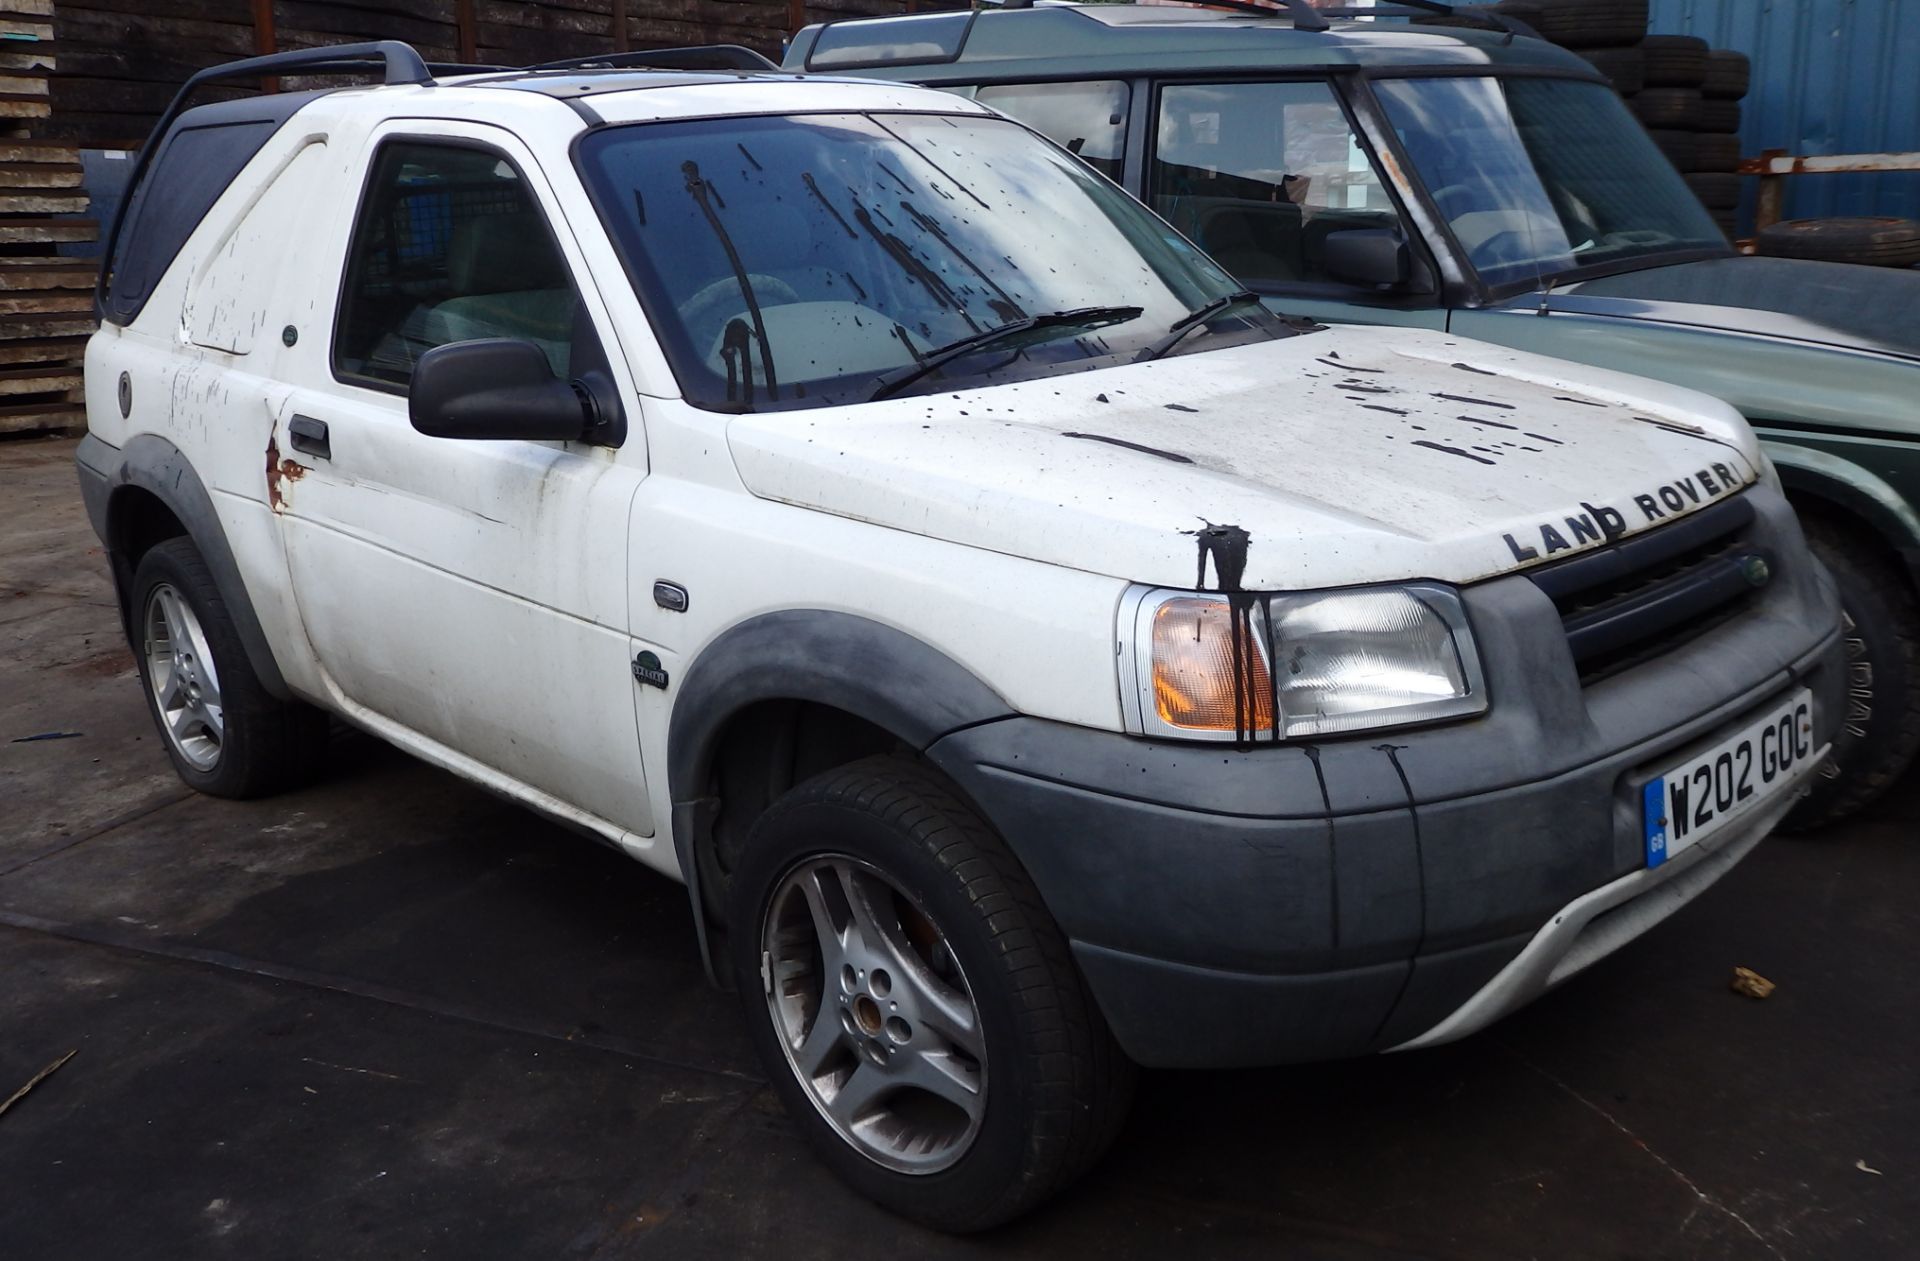 1 x Land Rover TD4 - Registration W202 GOC - Key In Ignitiuon - Been Standing In Yard For 7 Months -